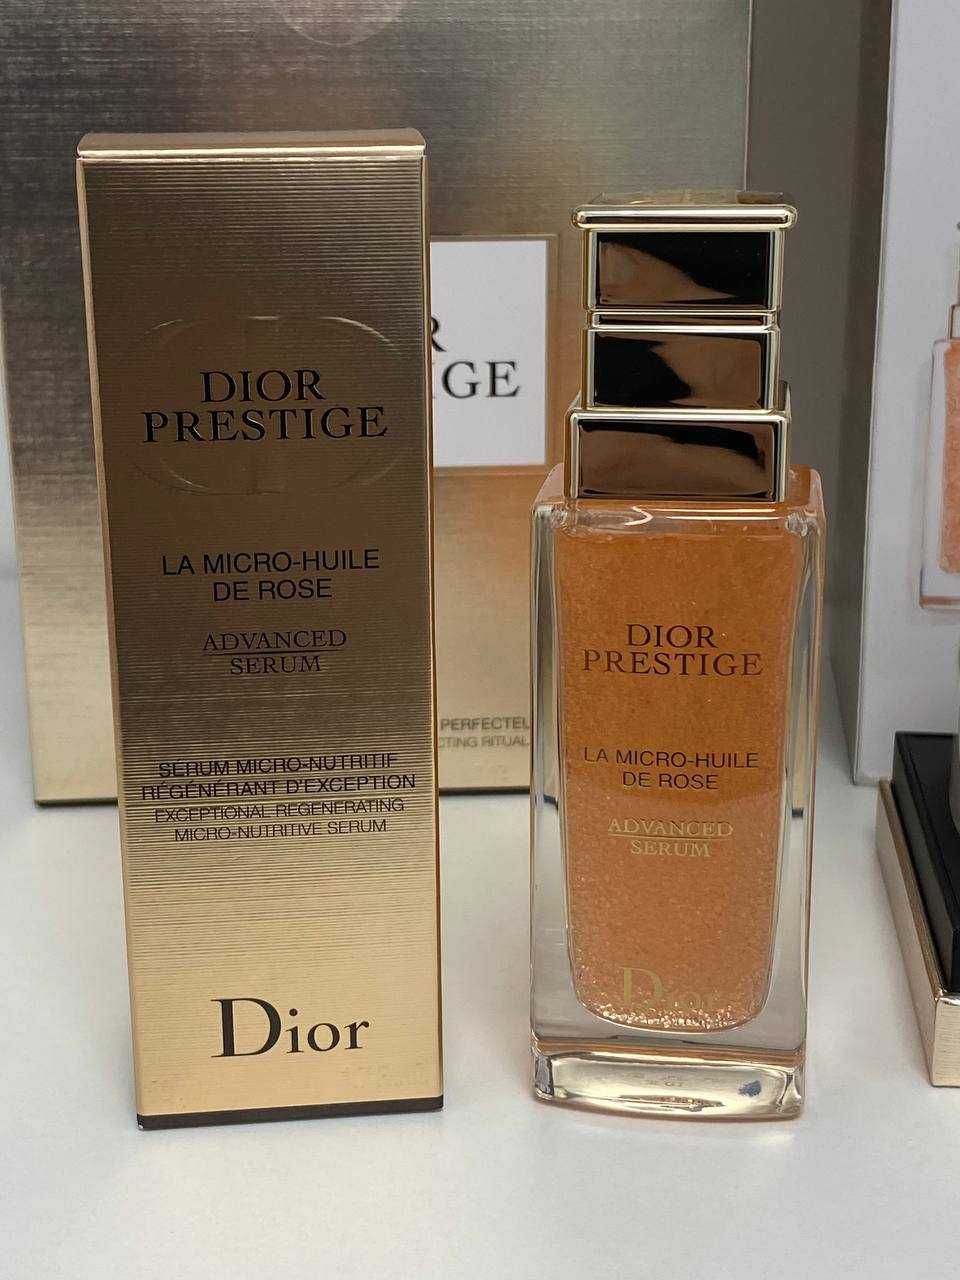 Dior Prestige Travel Collection The Regenerating & Perfecting Ritual